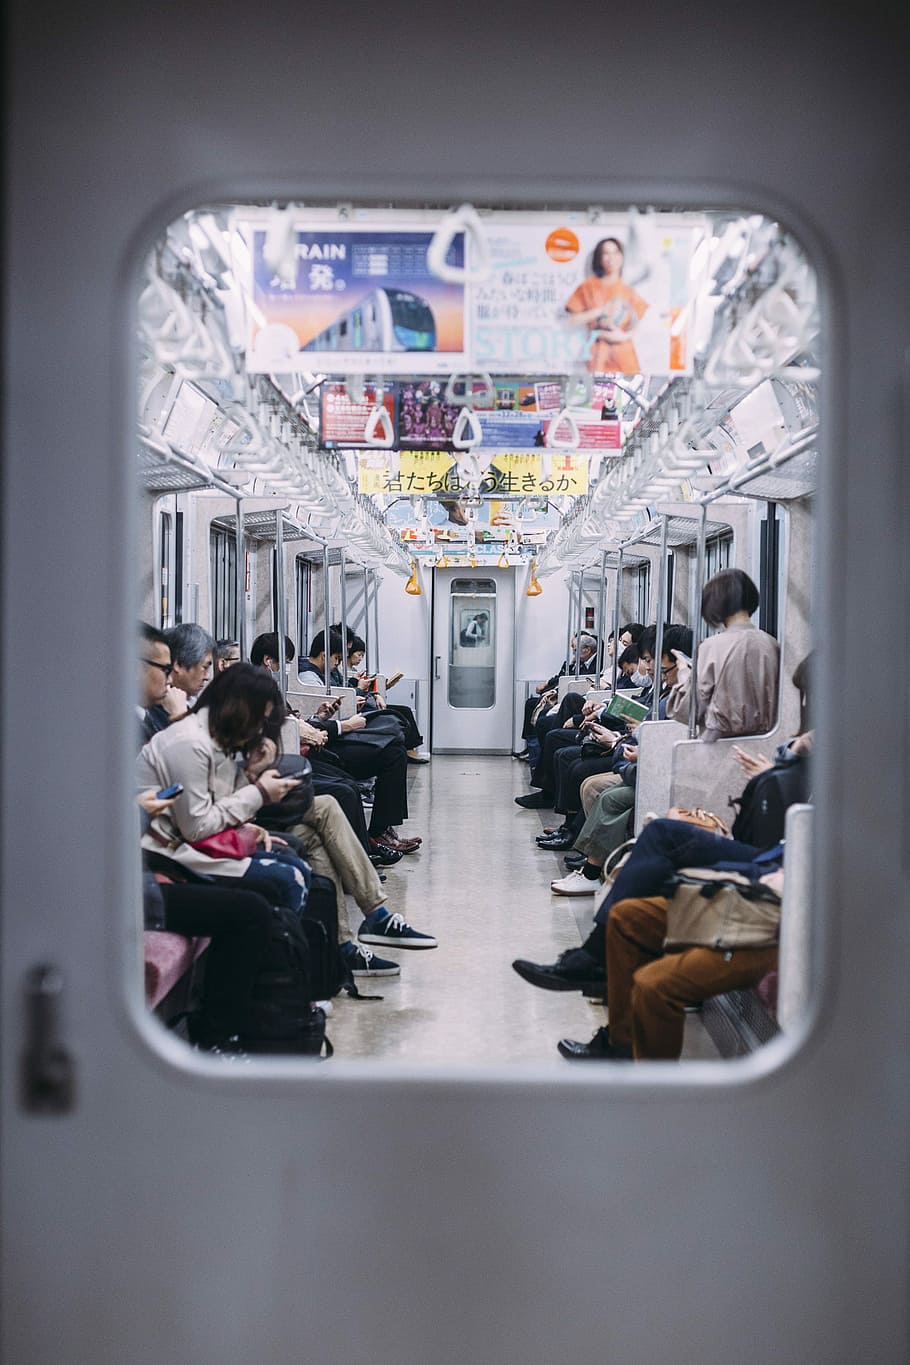 people at the train looking at their phones, photo of people sitting inside of train